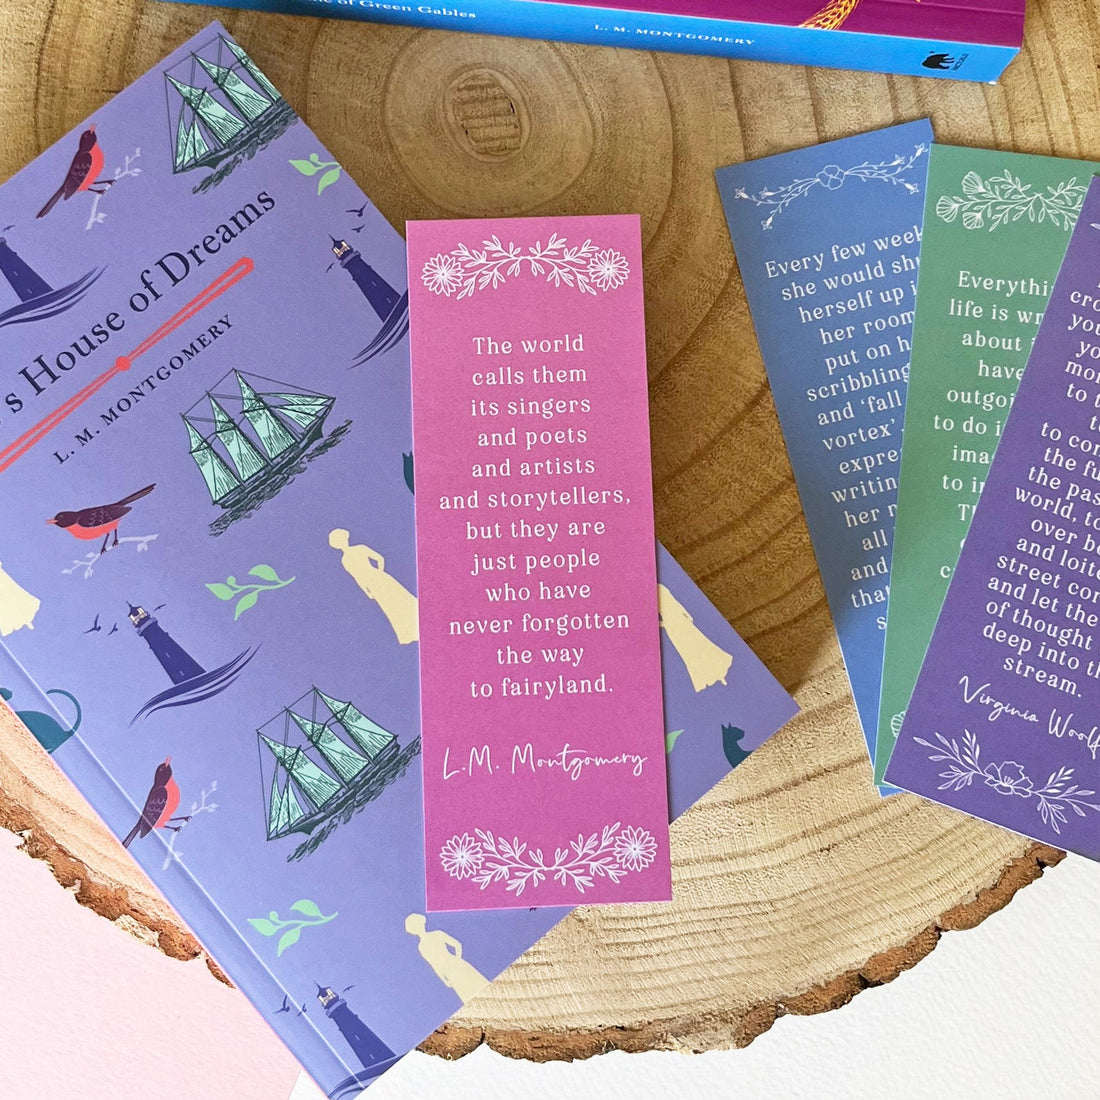 Quotes By Influential Women Authors Bookmarks